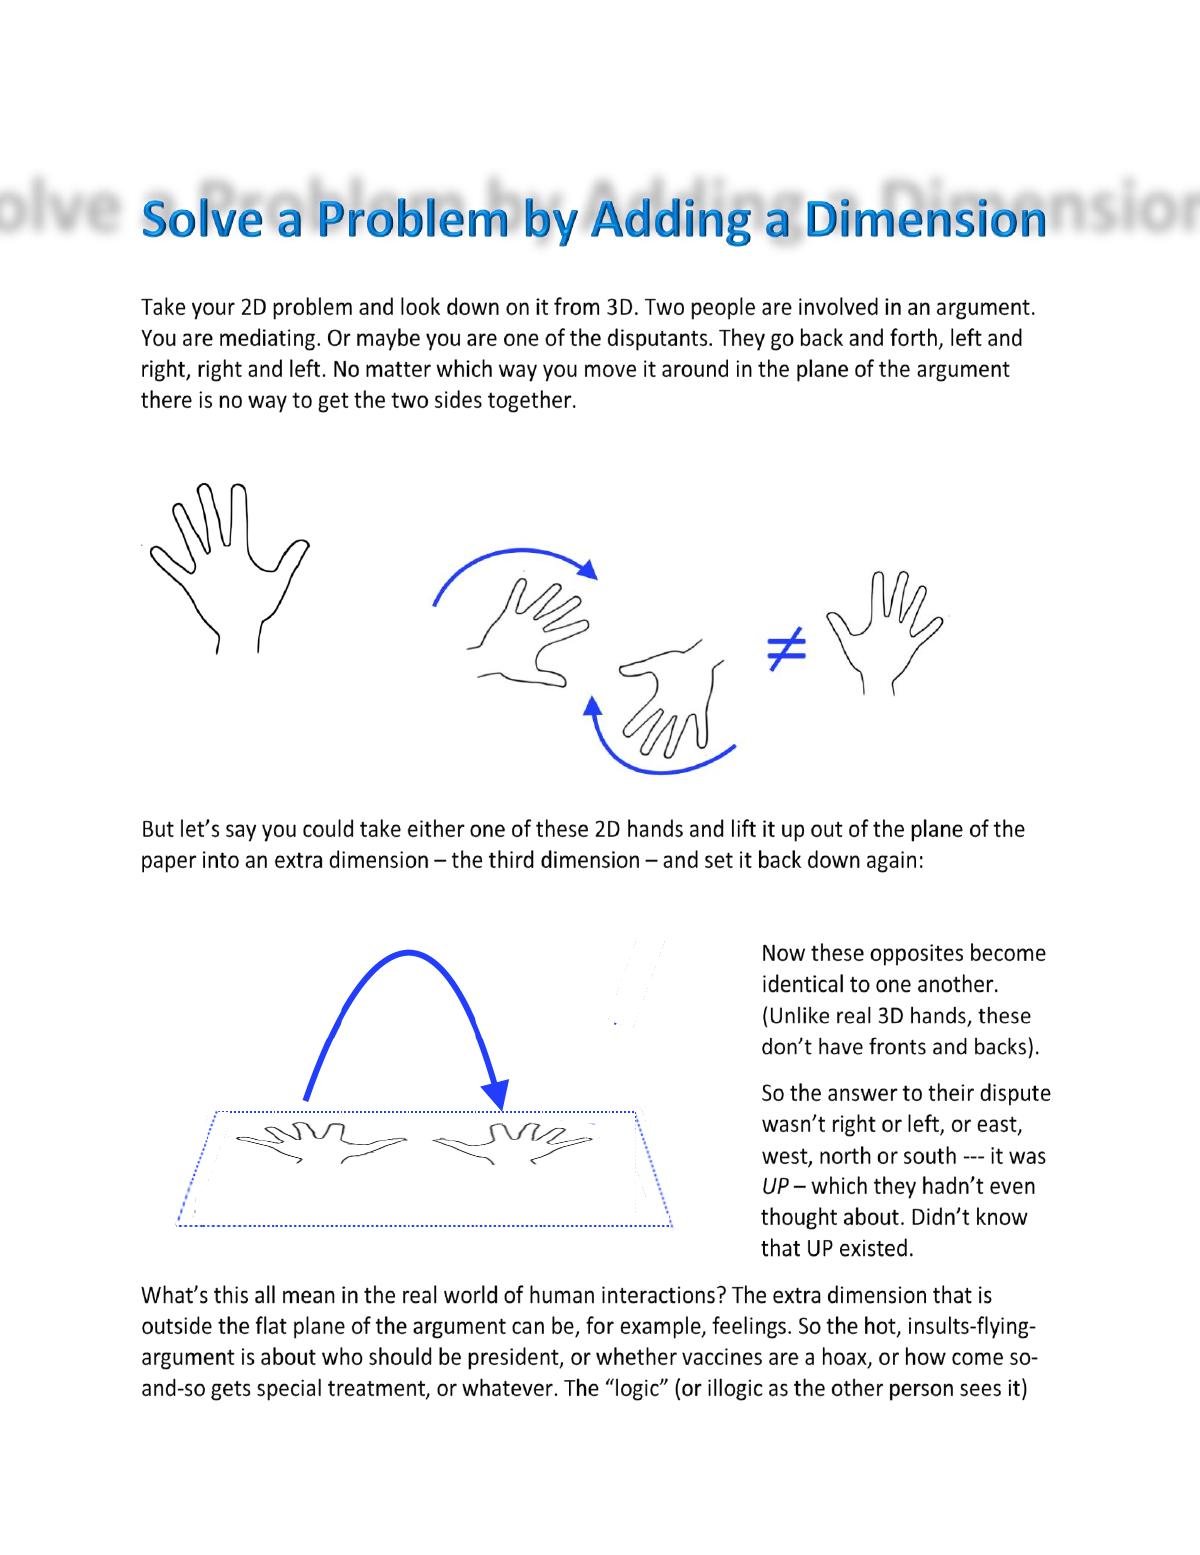 Solve a Problem by Adding a Dimension